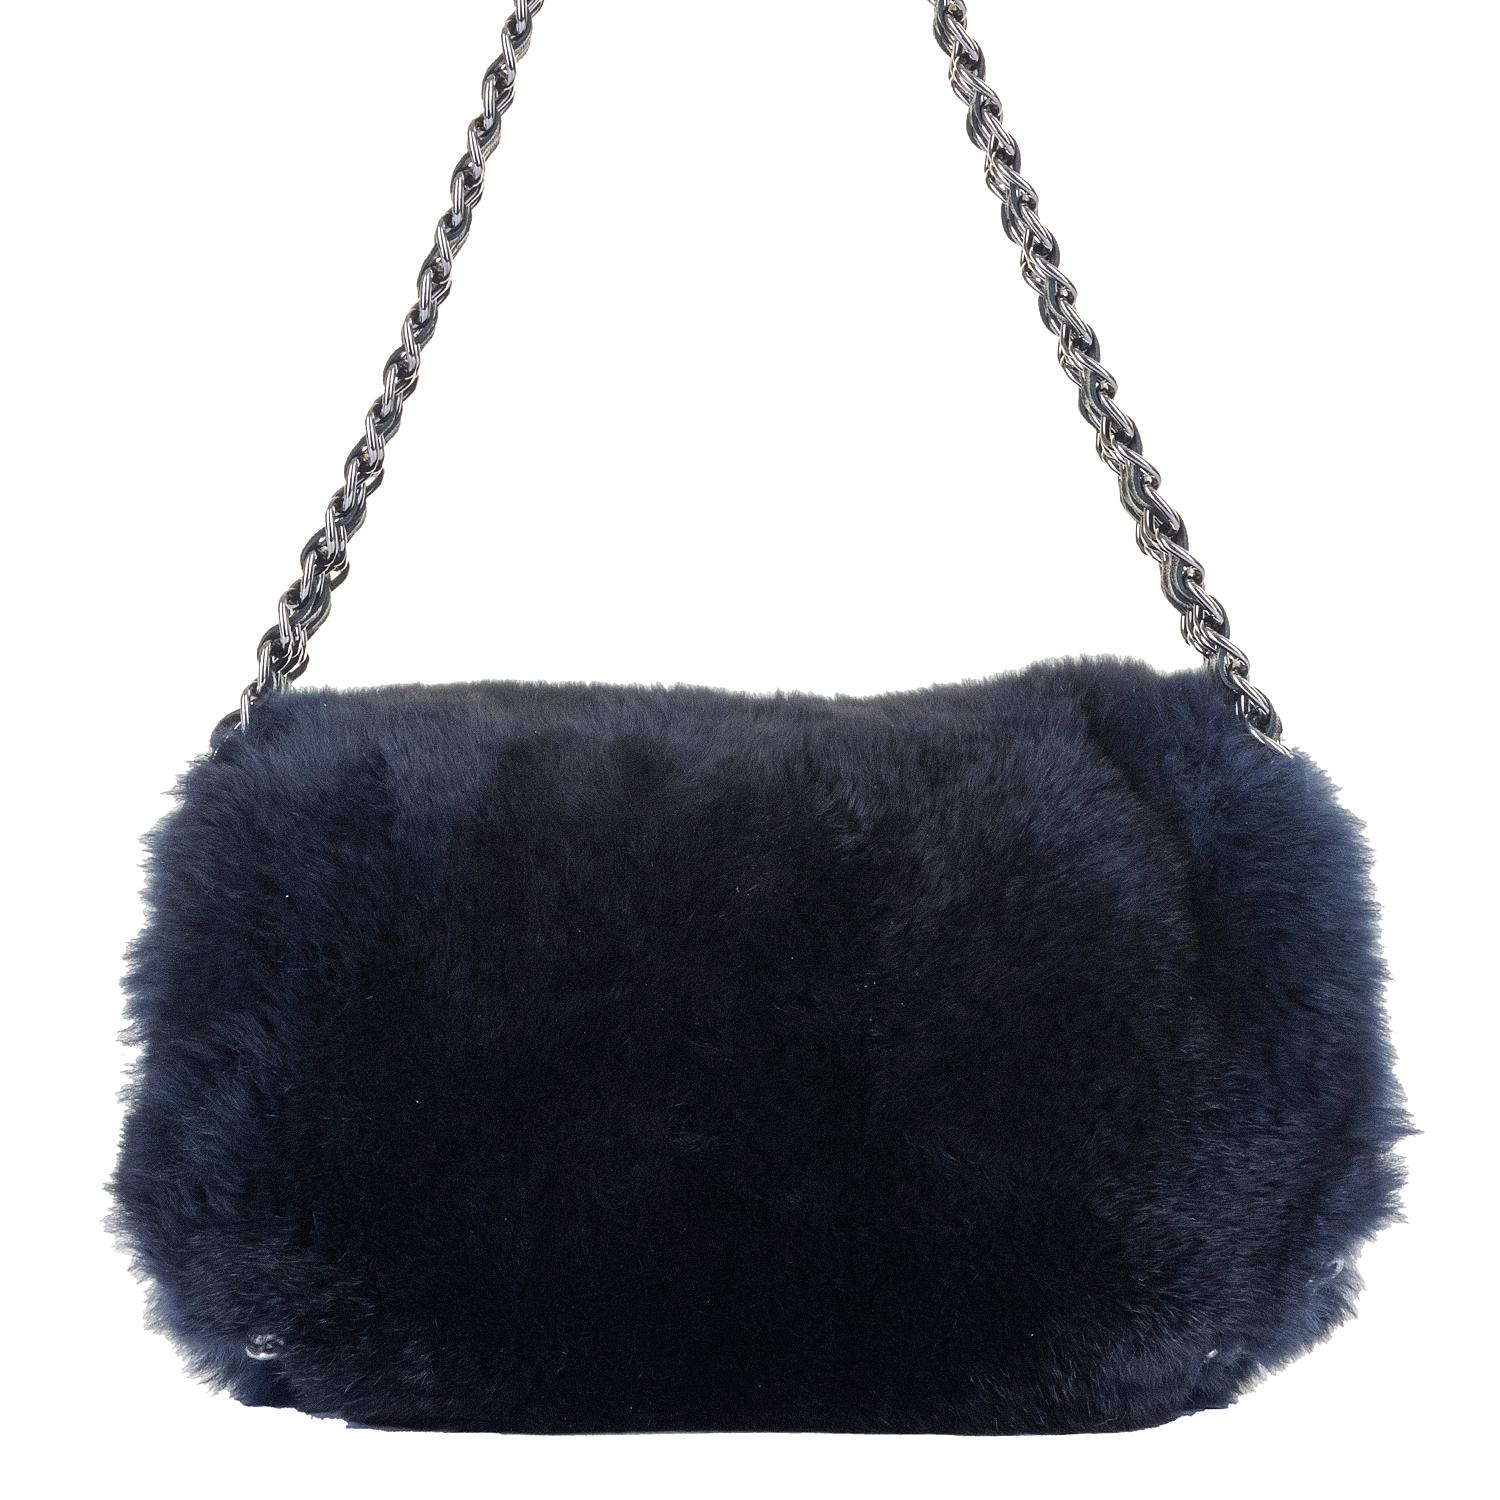 Rare Chanel Midnight Blue 'Orylag' Fur Evening Bag with Triple Shoulder Straps  In Excellent Condition For Sale In London, GB